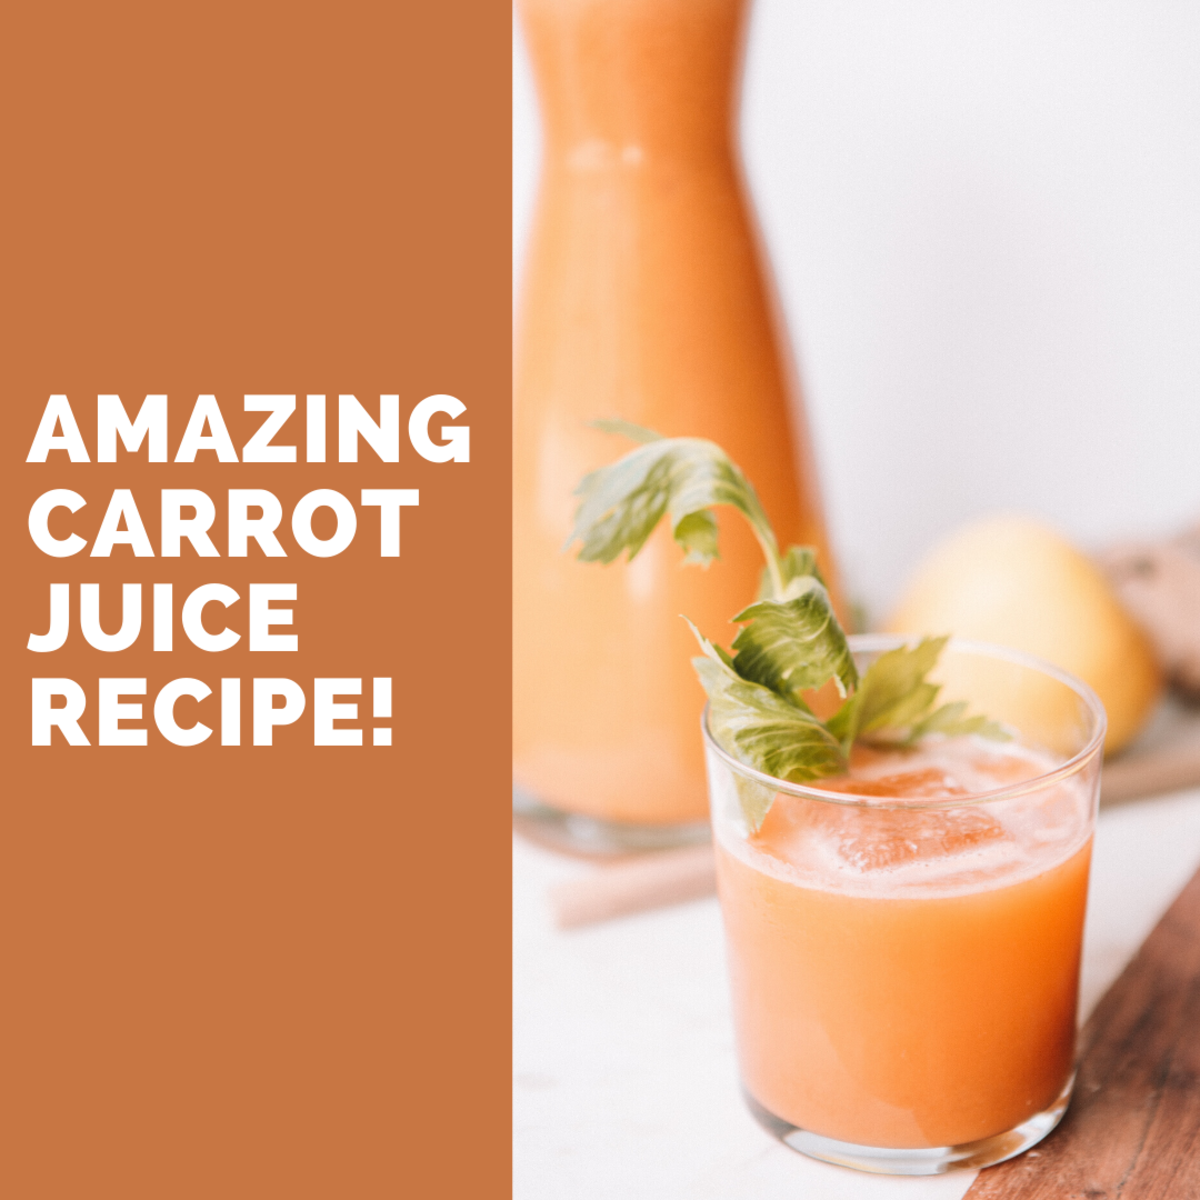 Try these amazing carrot juice recipes!